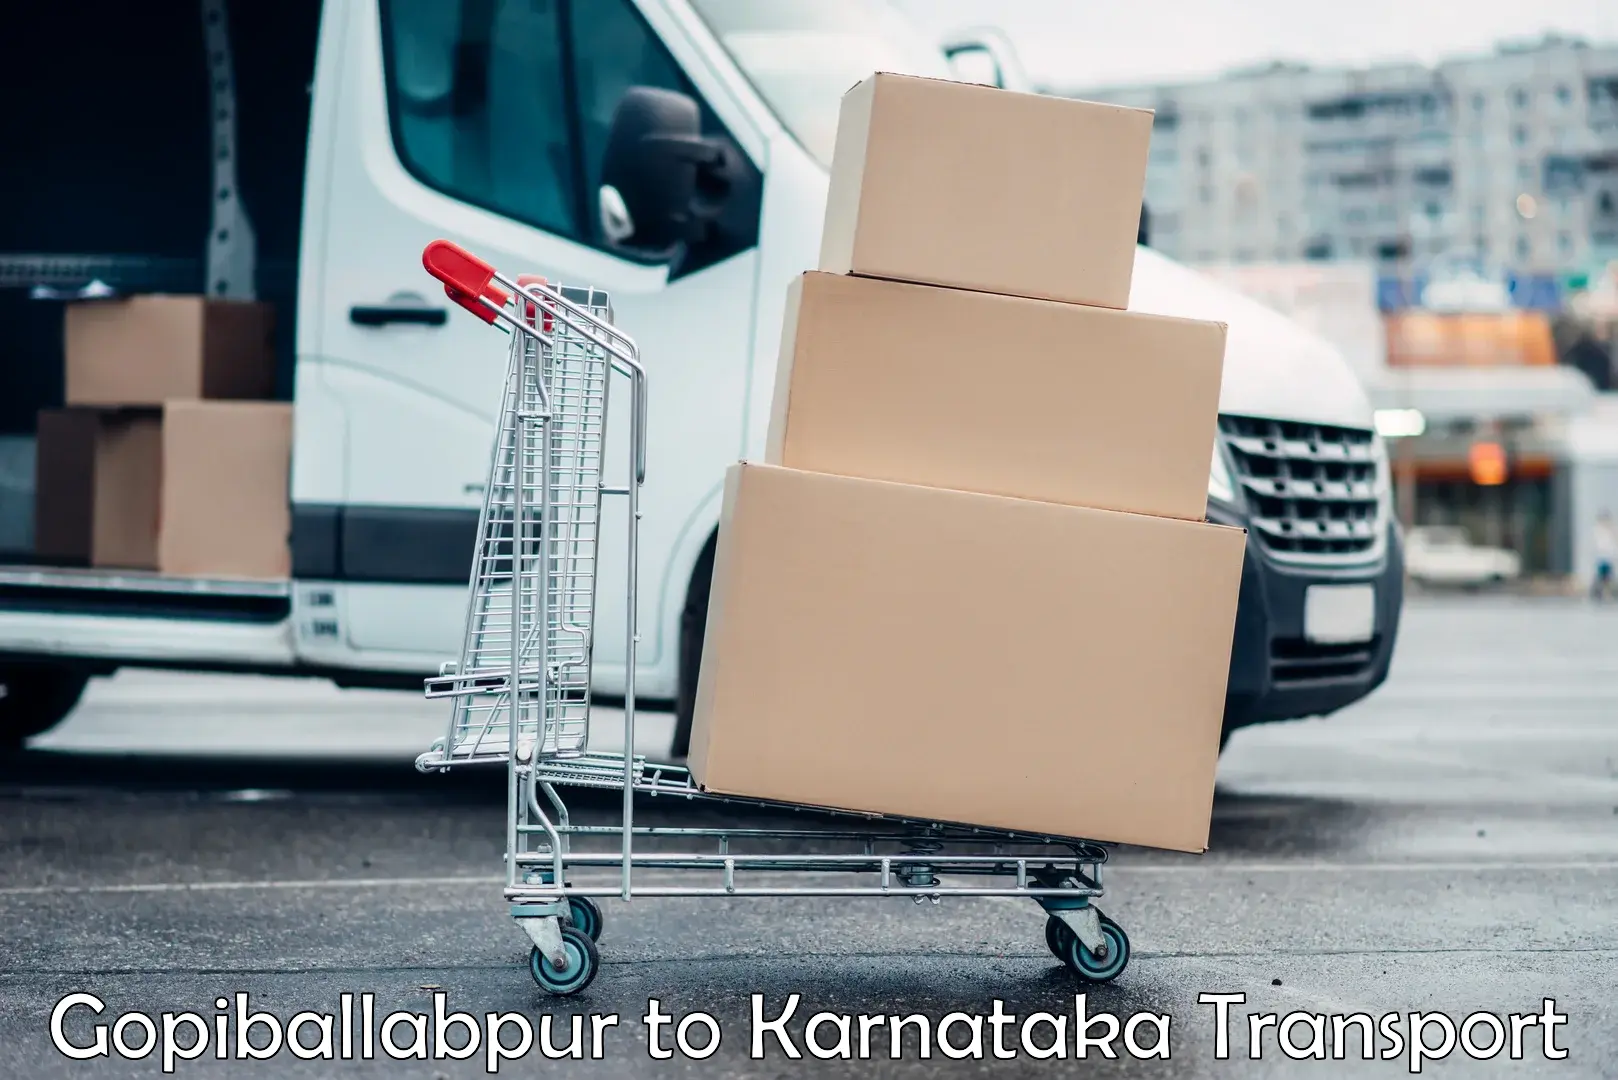 Domestic transport services Gopiballabpur to Bantwal